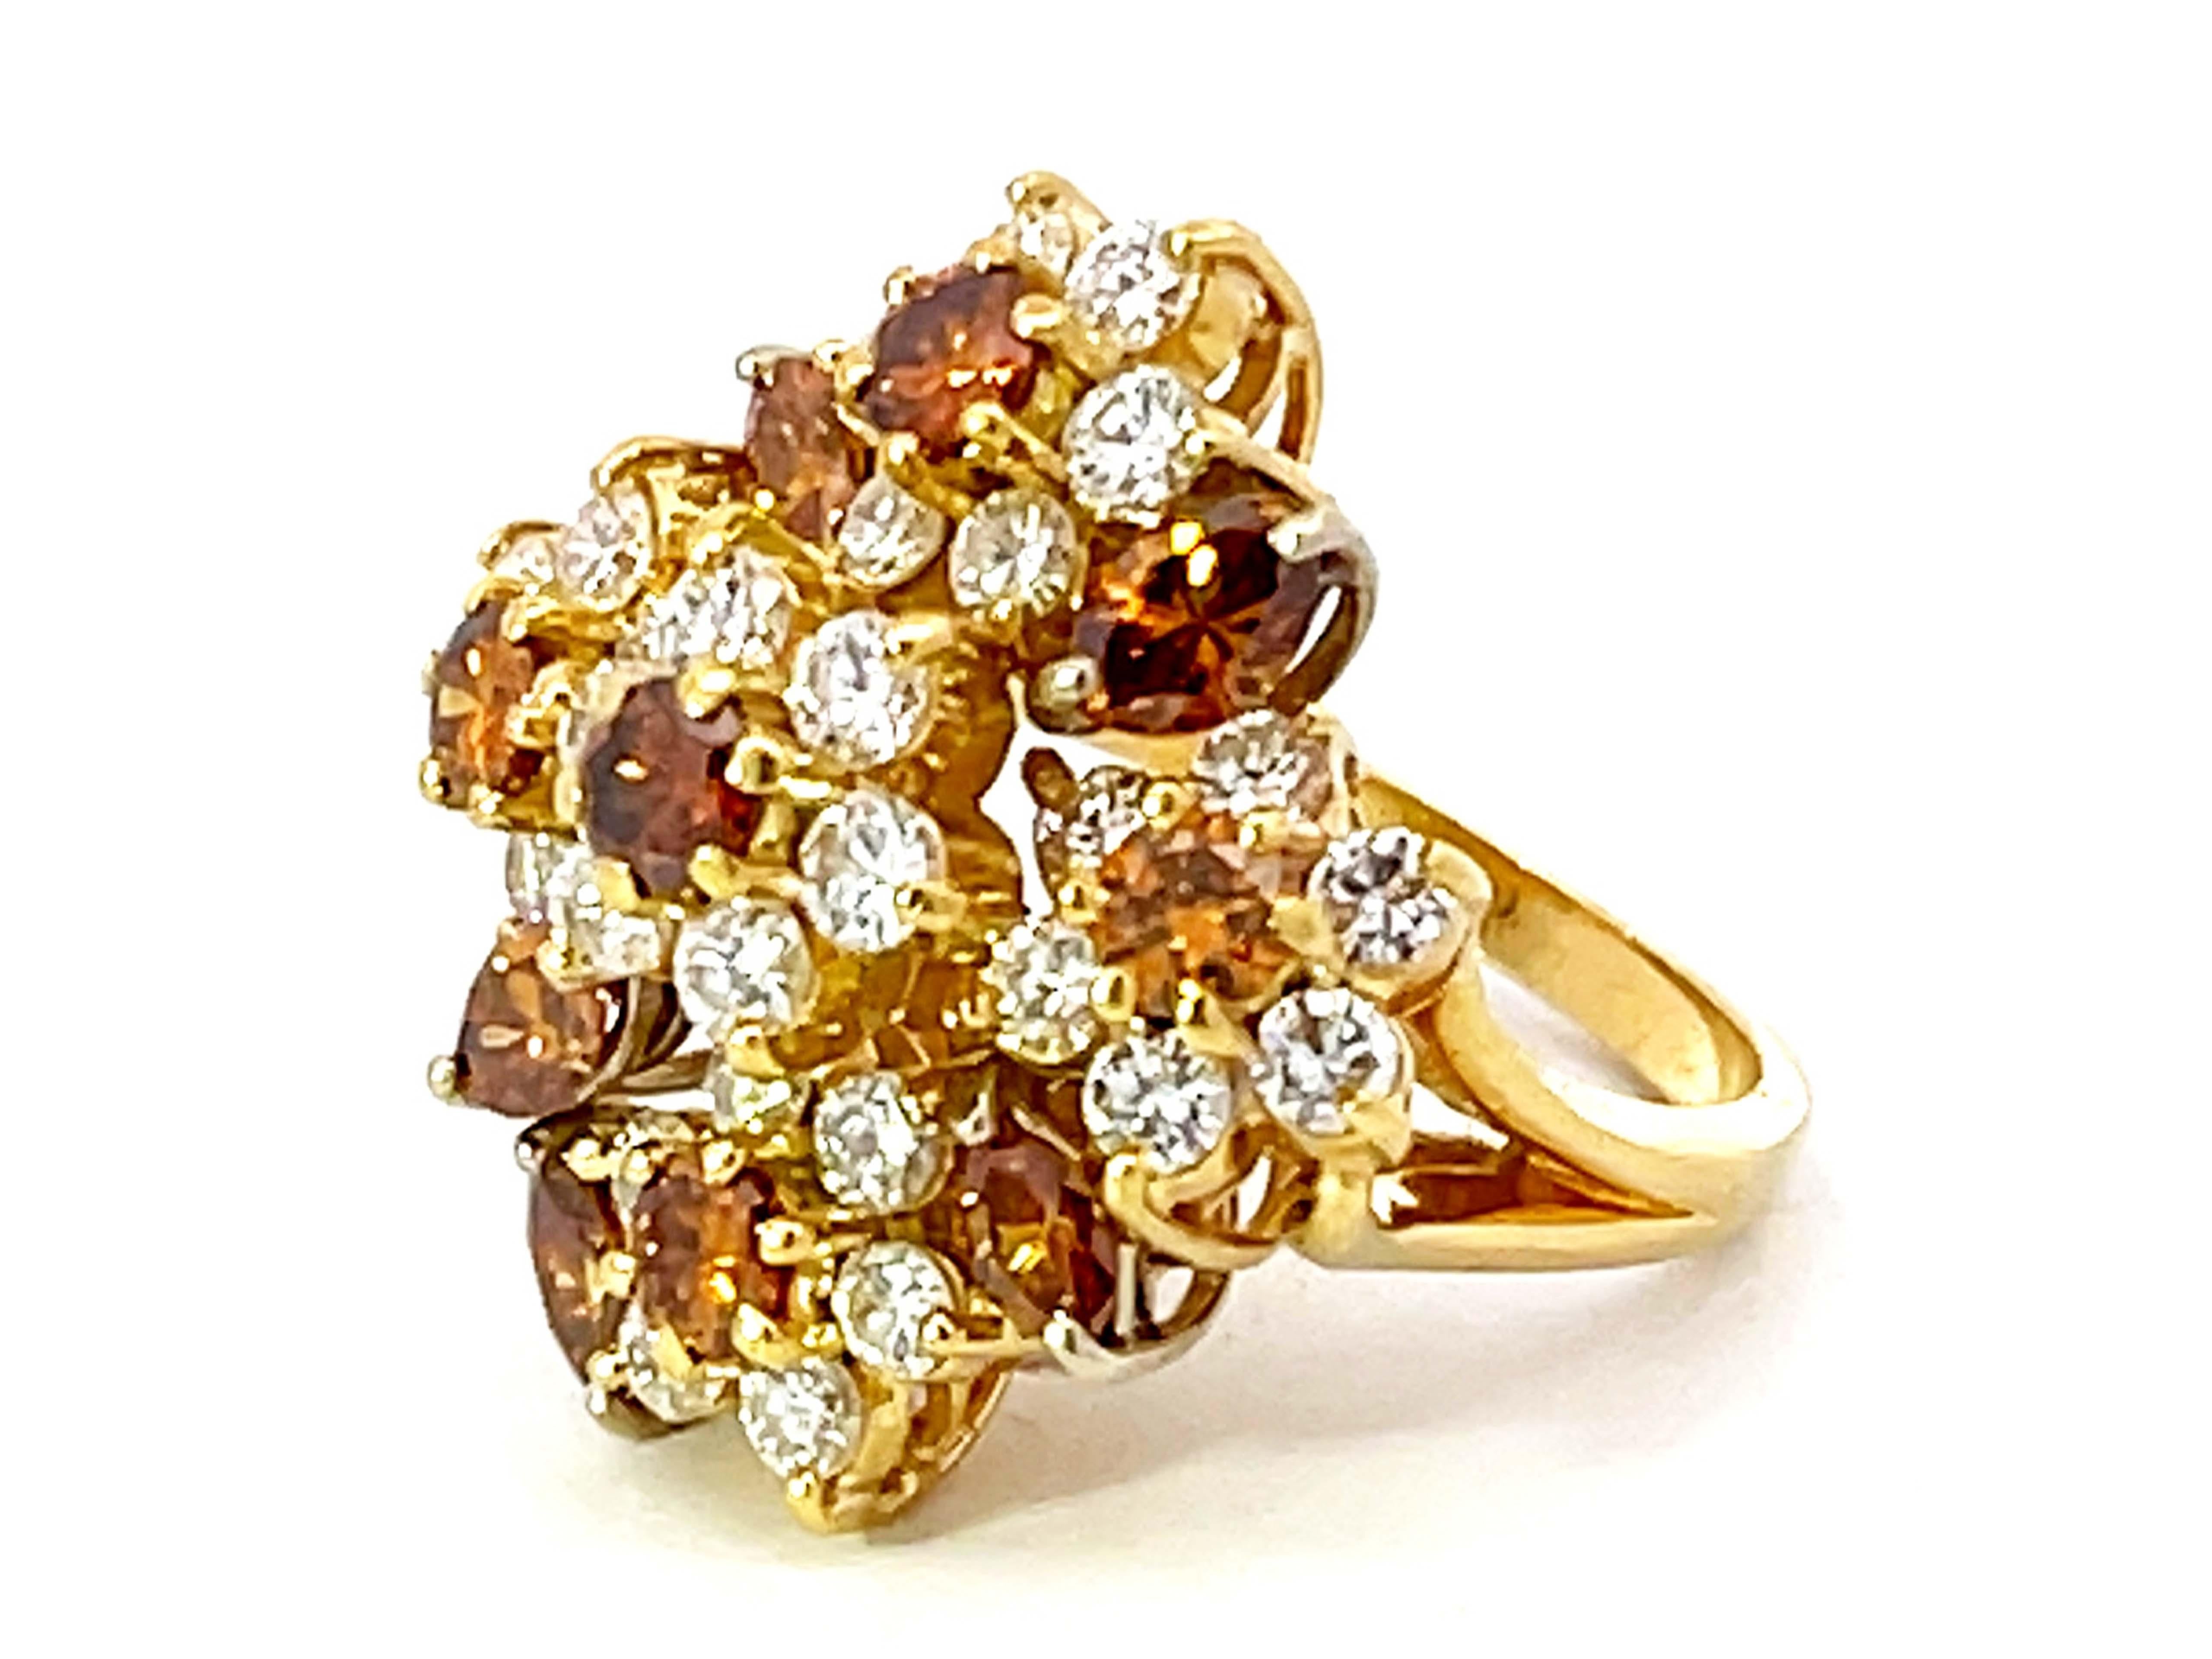 Brilliant Cut Terrel and Zimmelman Natural Fancy Vivid Diamond Cluster Ring in 18K Yellow Gold For Sale